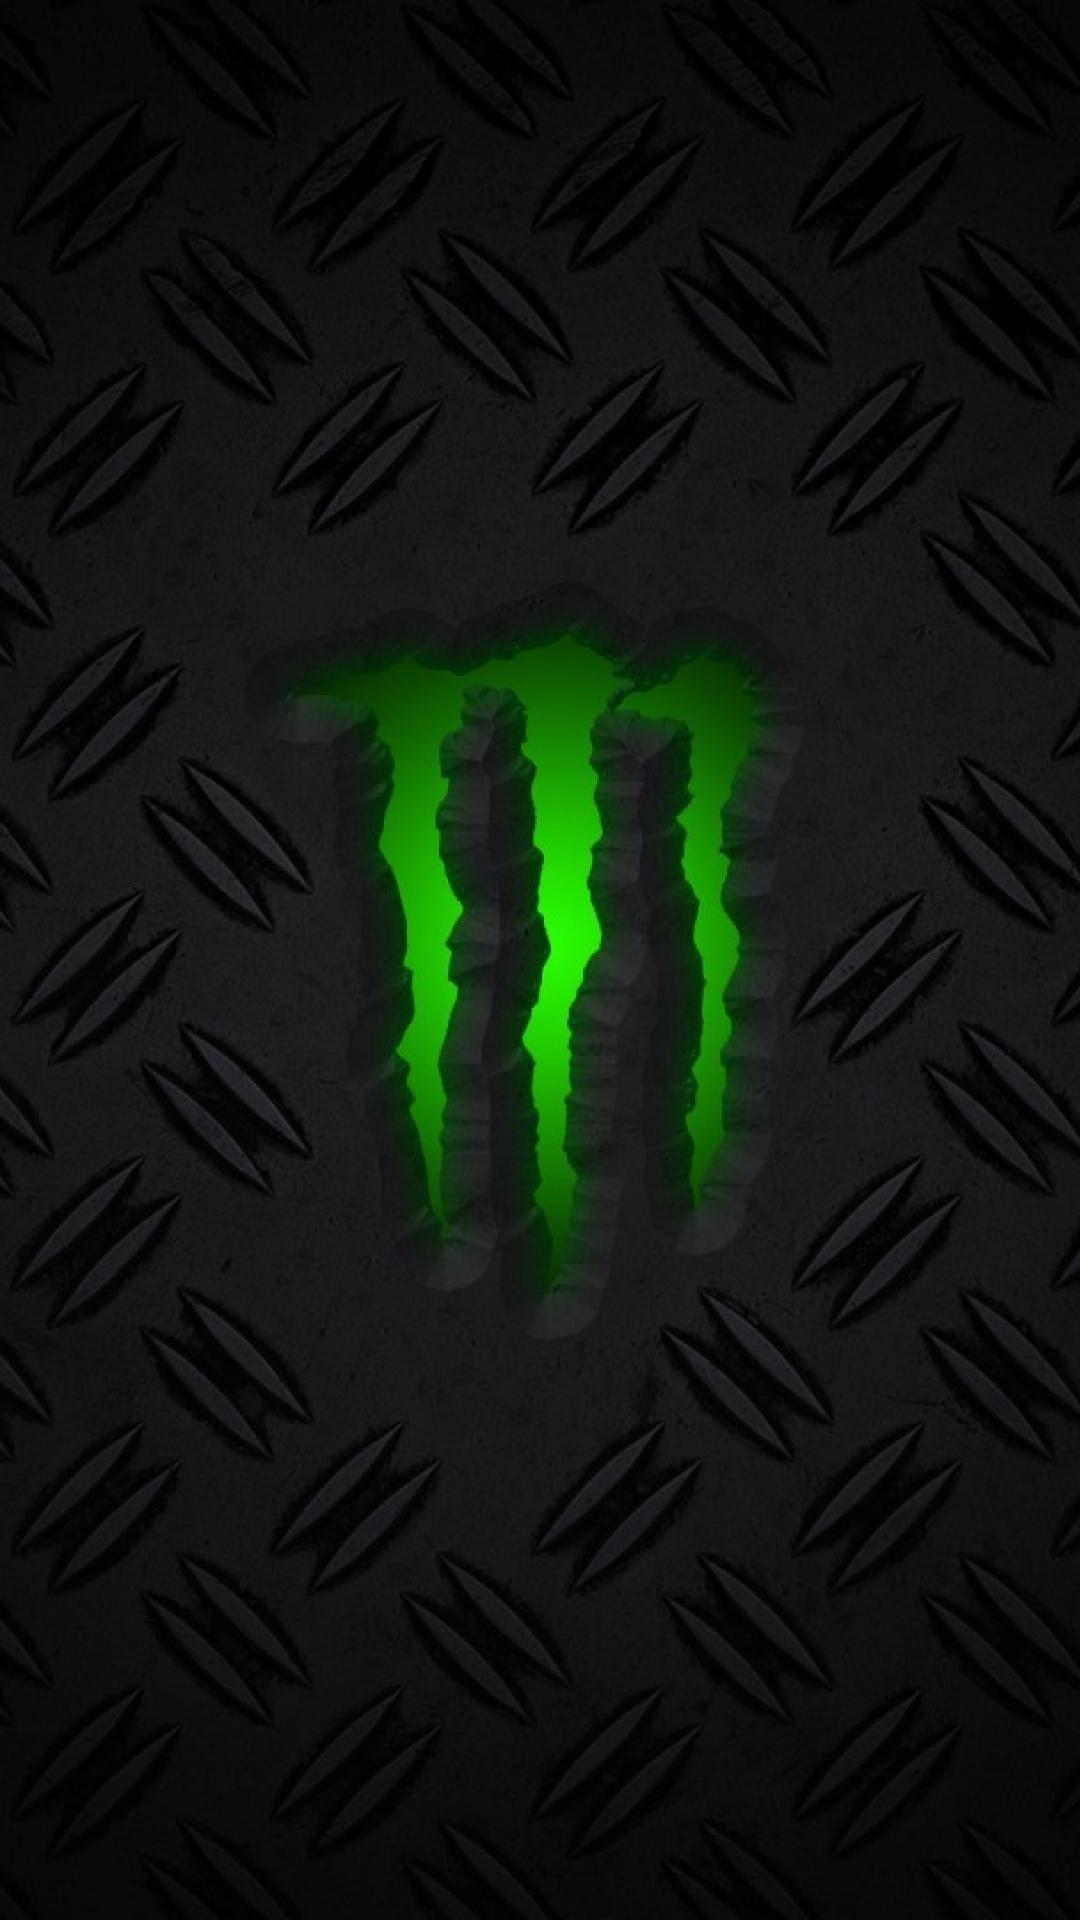 Monster HD Wallpapers For Mobile - Wallpaper Cave